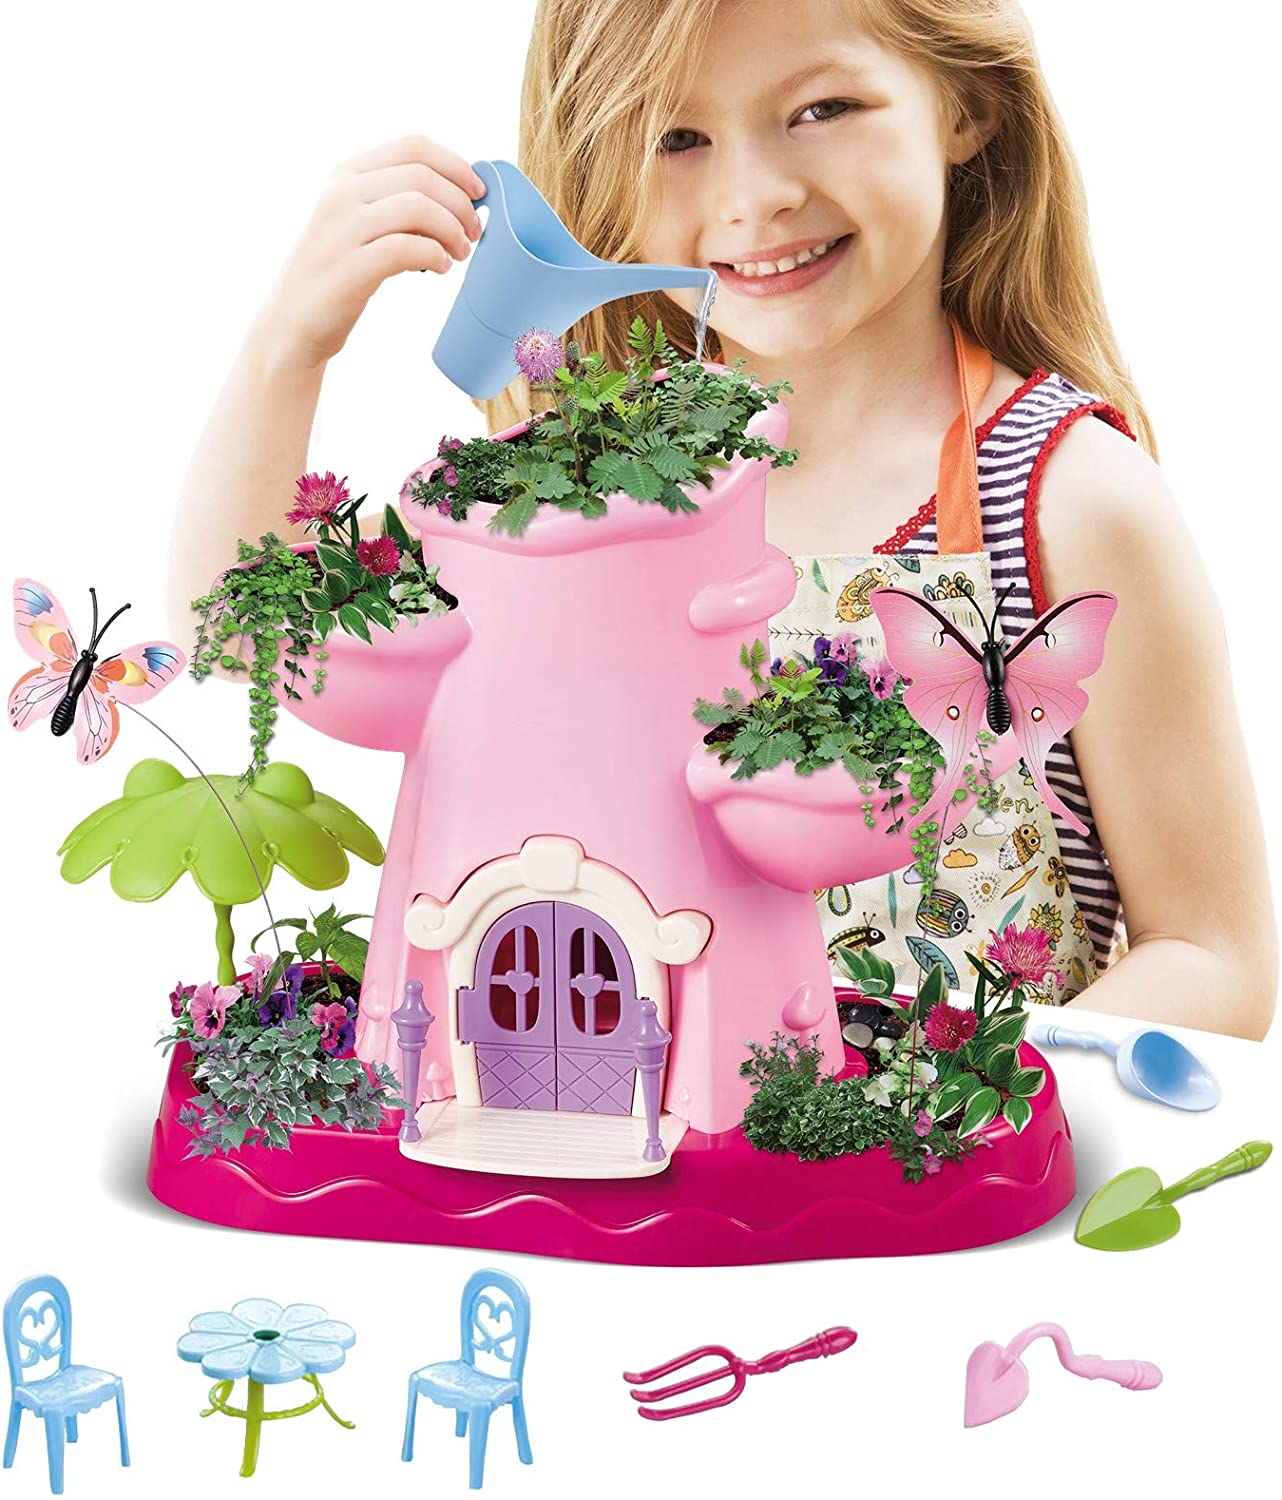 Kids Magical Garden Growing Kit Includes Tools Seeds Soil Flower Plant Tree Interactive Play Fairy Toys Inspires Horticulture Learning Great Gift for Children Girls Pink